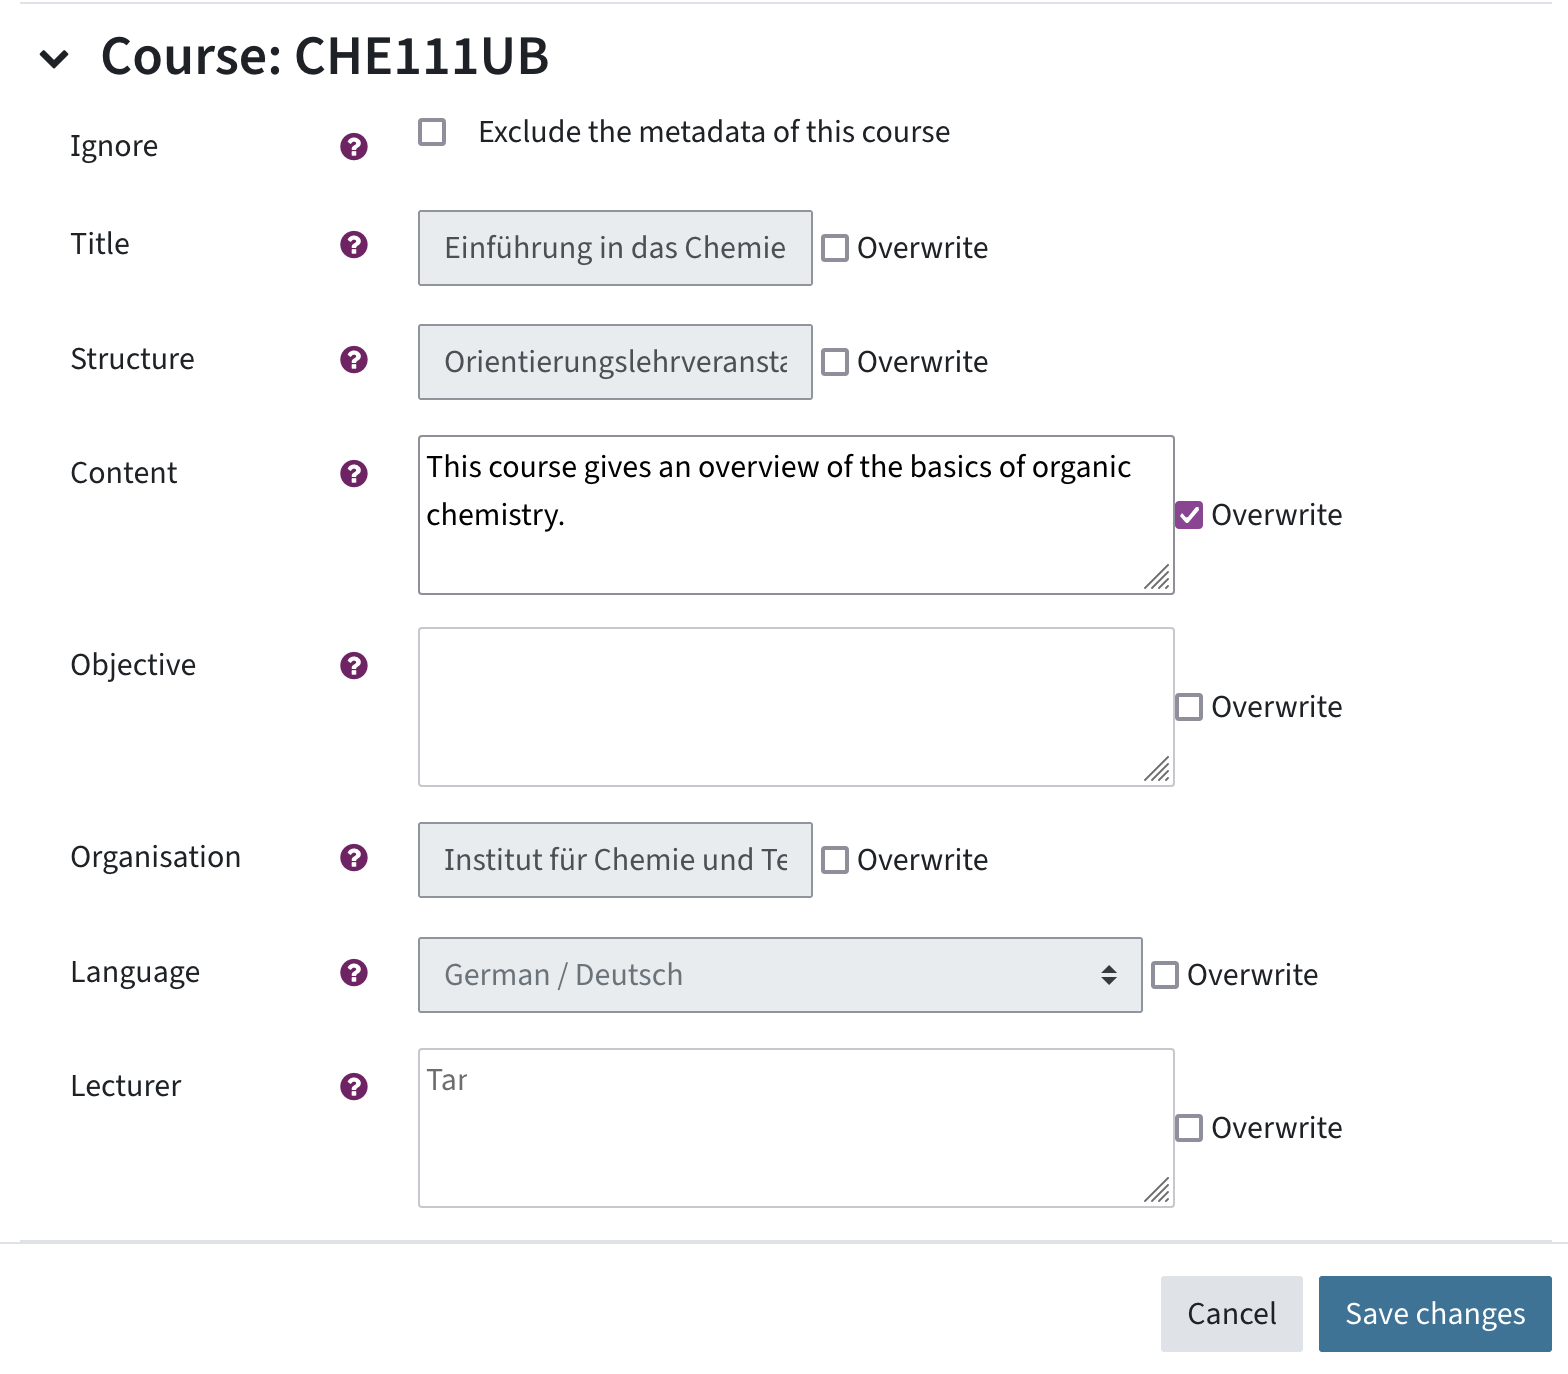 Course metadata consist of Title, Structure, Content, Objective, Organisation, Language, Lecturer. They can all be overwritten with a checkbox after the field.